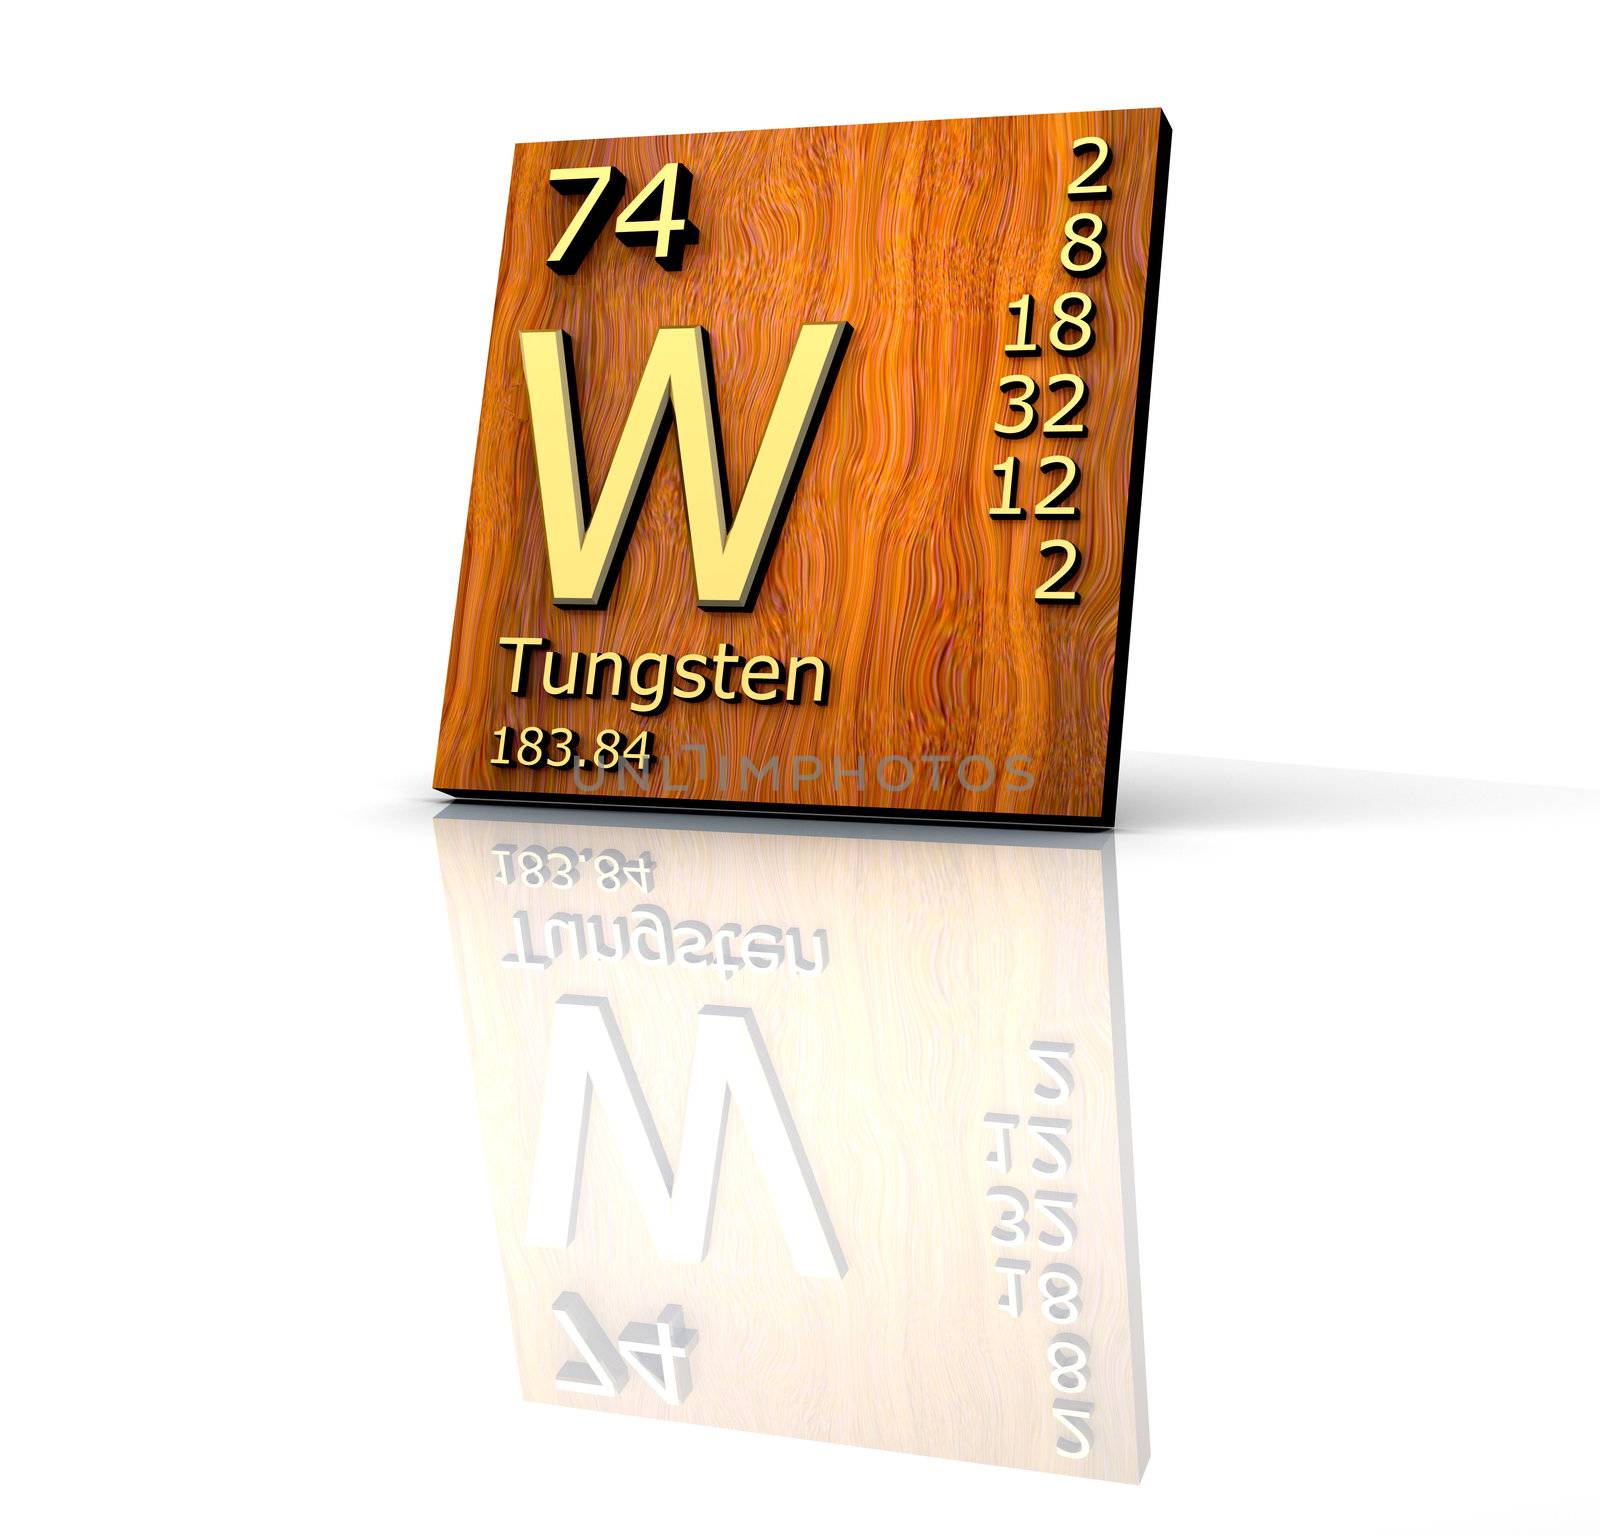 Tungsten form Periodic Table of Elements - wood board - 3d made